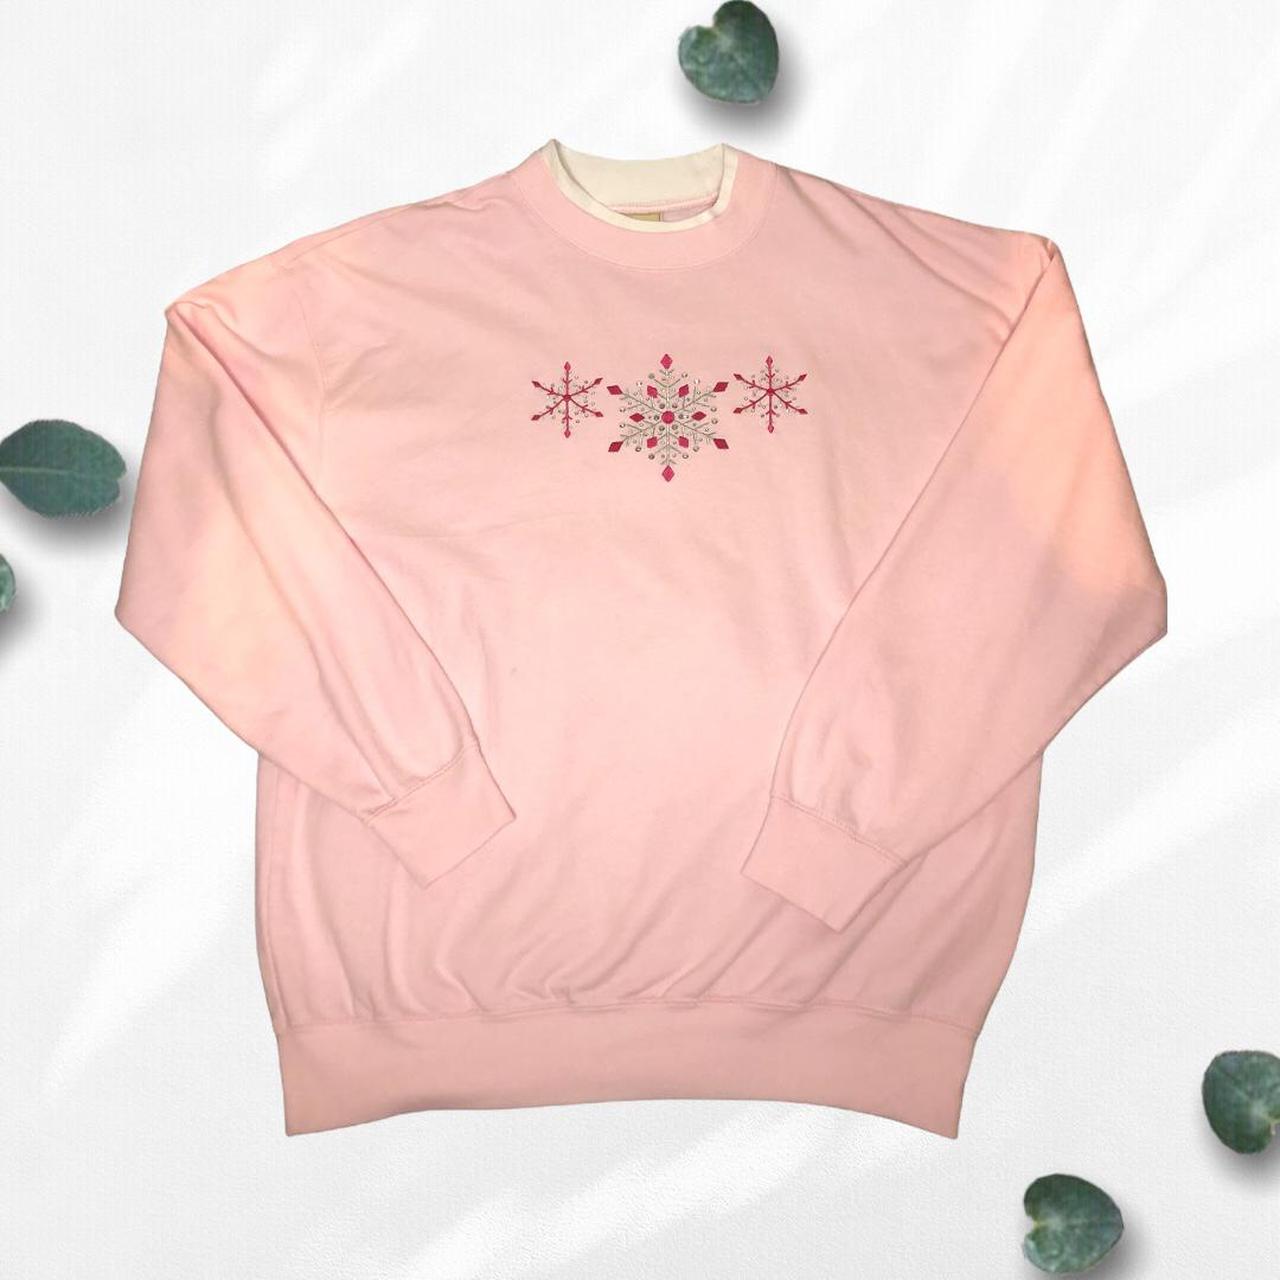 Product Image 1 - Vintage pink and white snowflakes